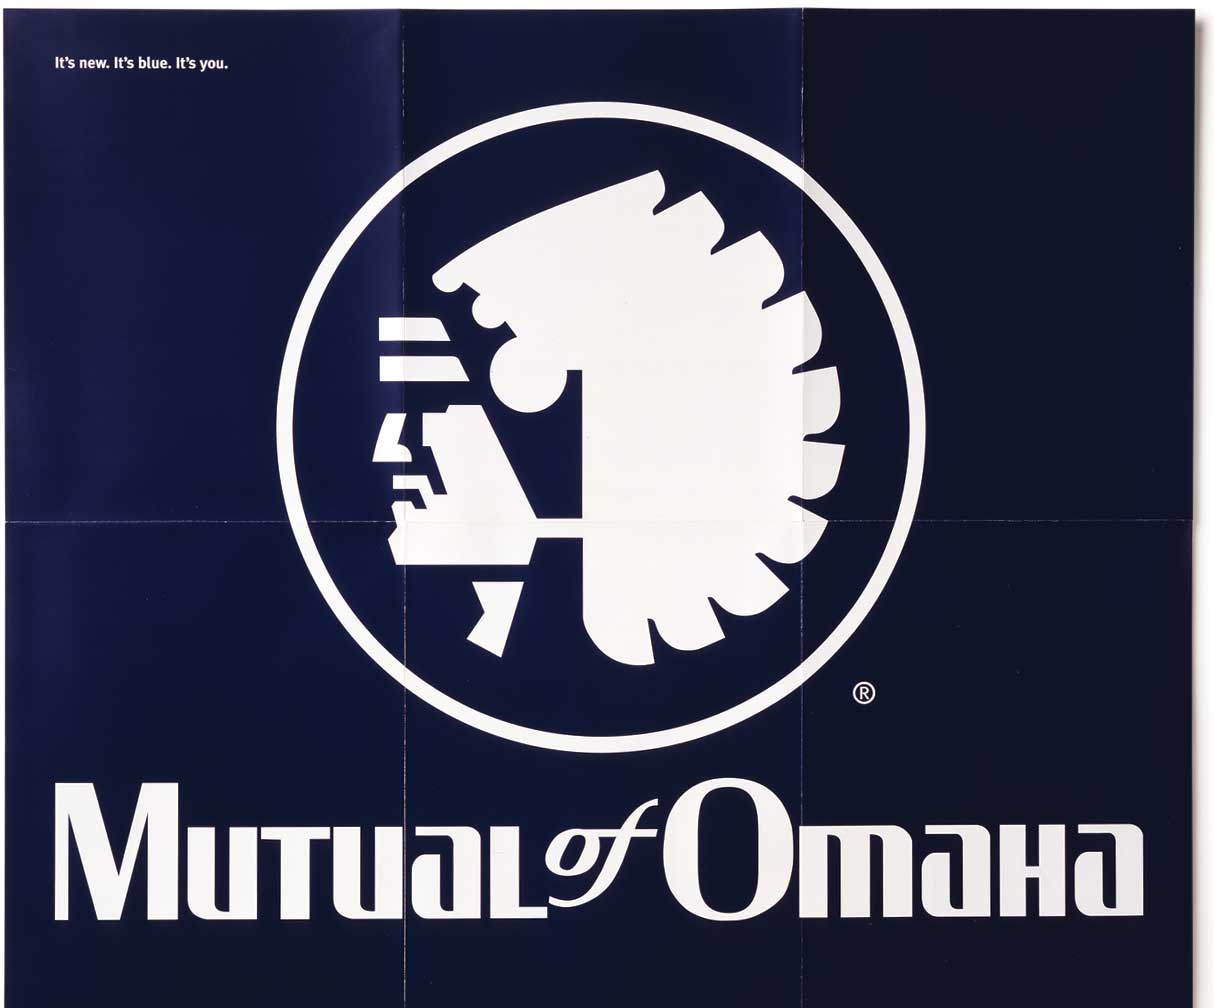 Mutual of Omaha, Medicare, Supplement